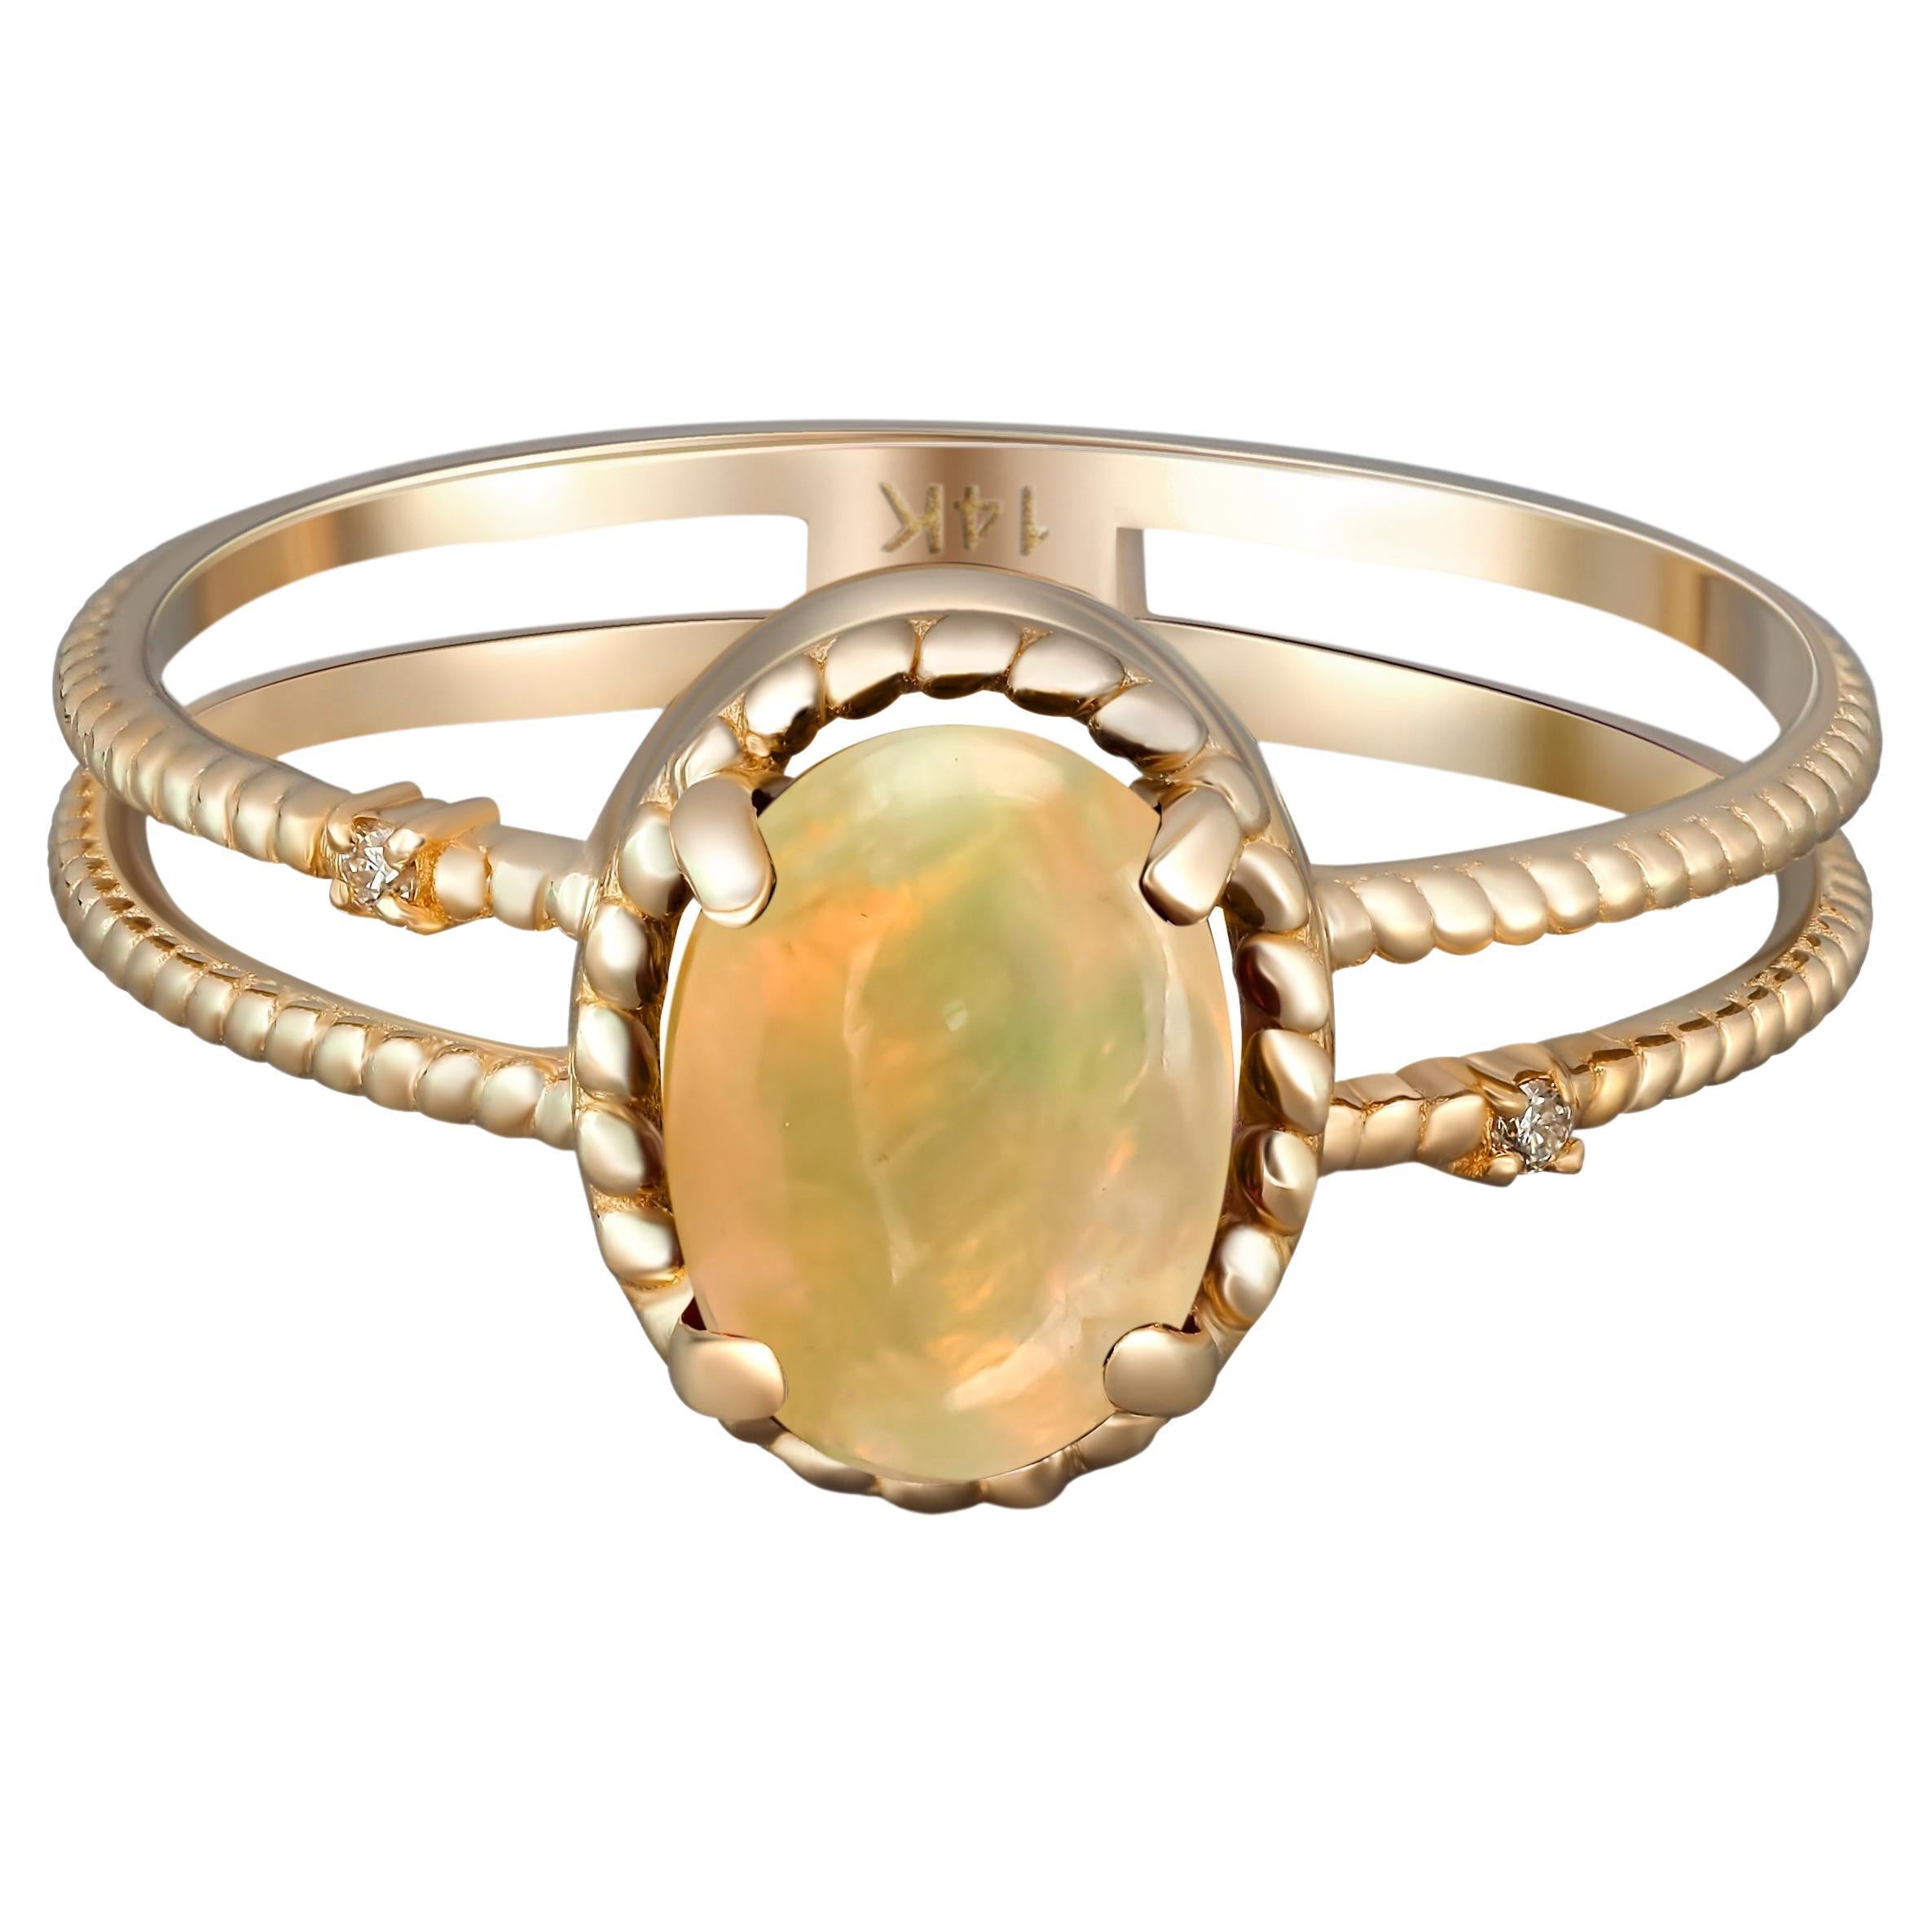 Cabochon Opal Ring. 14k Gold Ring with Opal. Minimalist Opal Ring